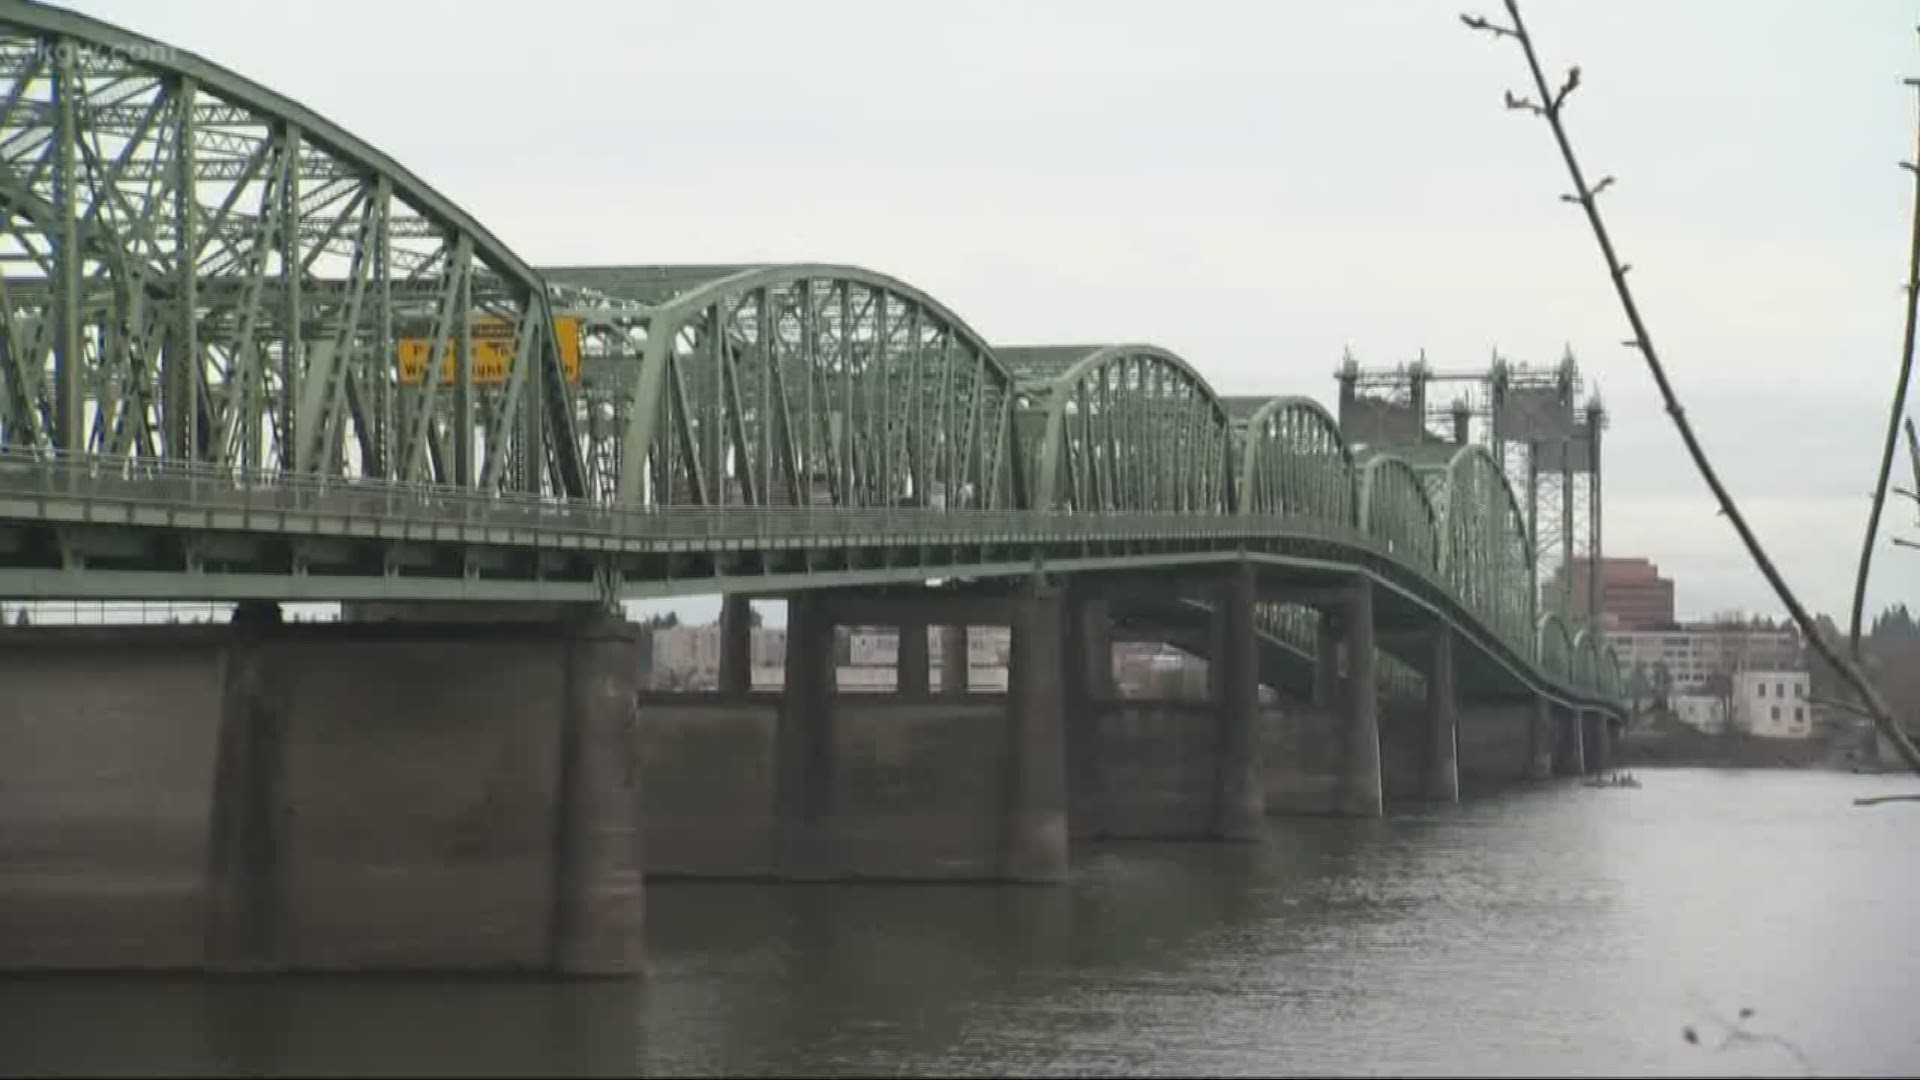 Oregon Governor Kate Brown says now is the time to replace the I-5 bridge.